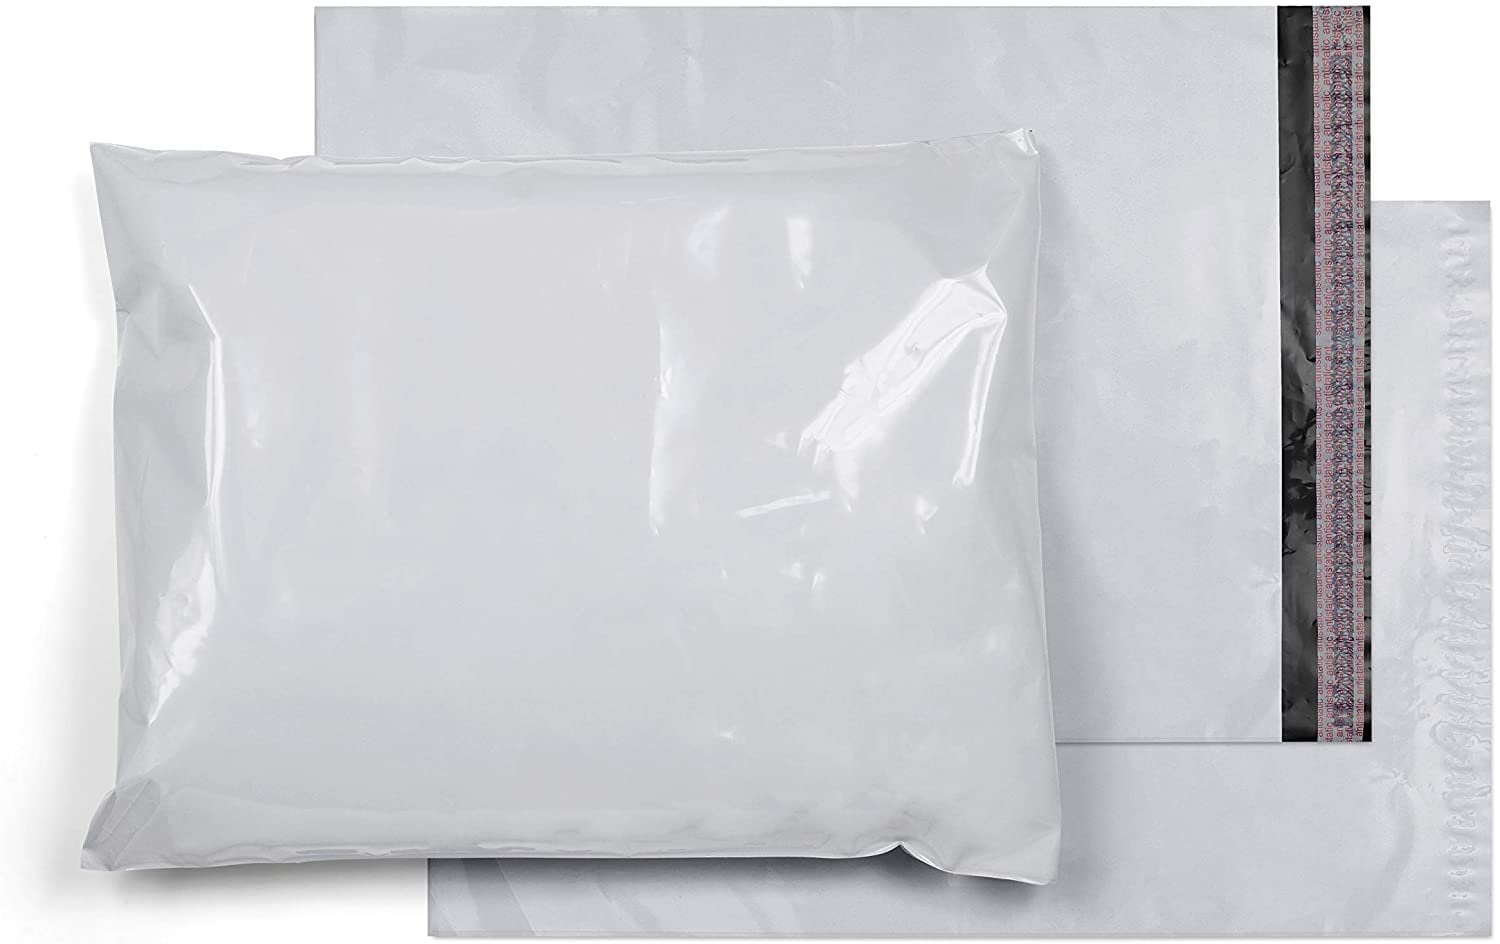 9X12 300 POLY MAILERS SHIPPING BAGS 100 EACH 6X9 10X13,